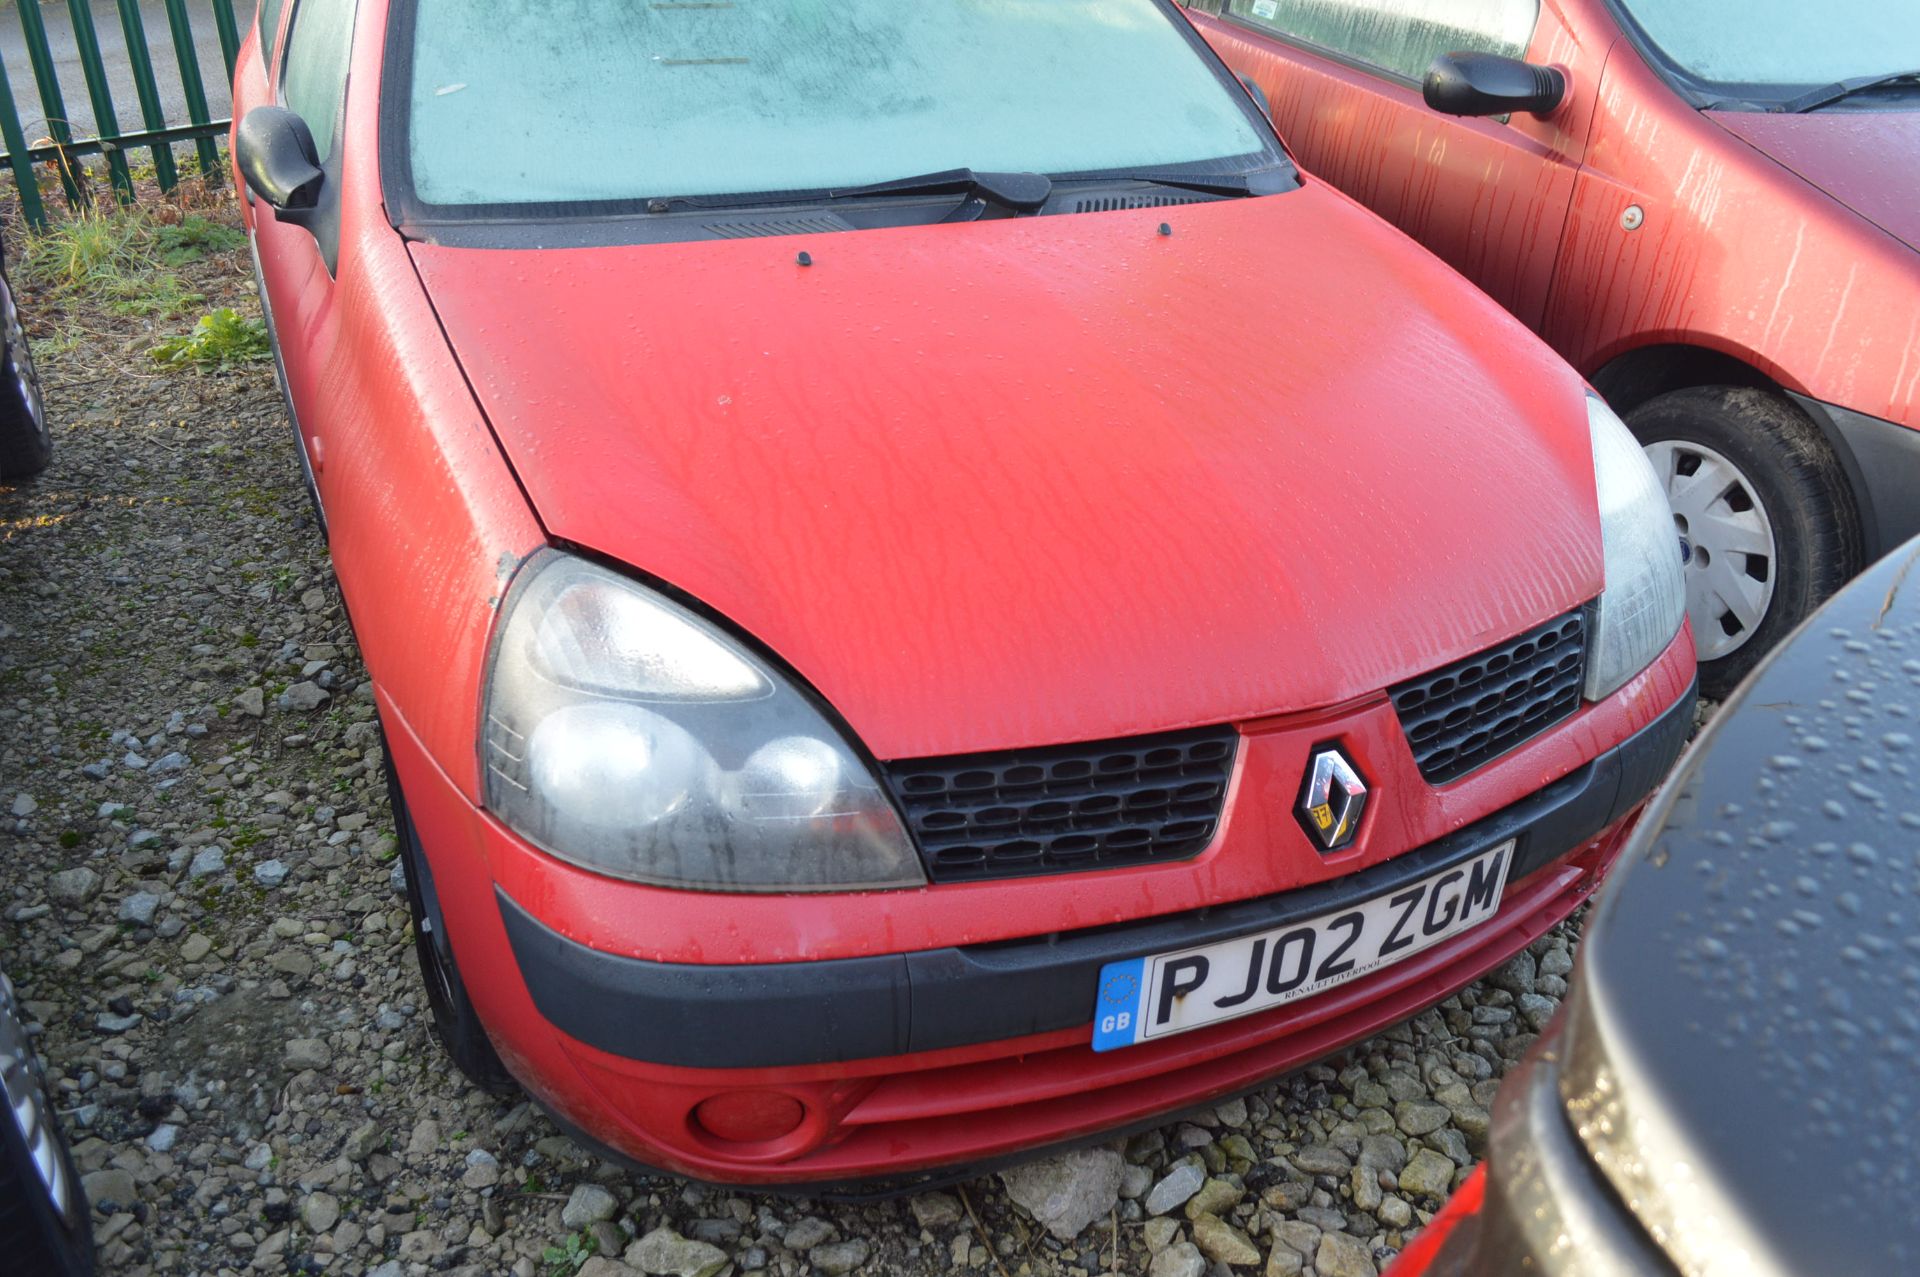 2002/02 REG RENAULT CLIO EXPRESSION 16V - SELLING AS SPARES / REPAIRS *NO VAT* - Image 3 of 9